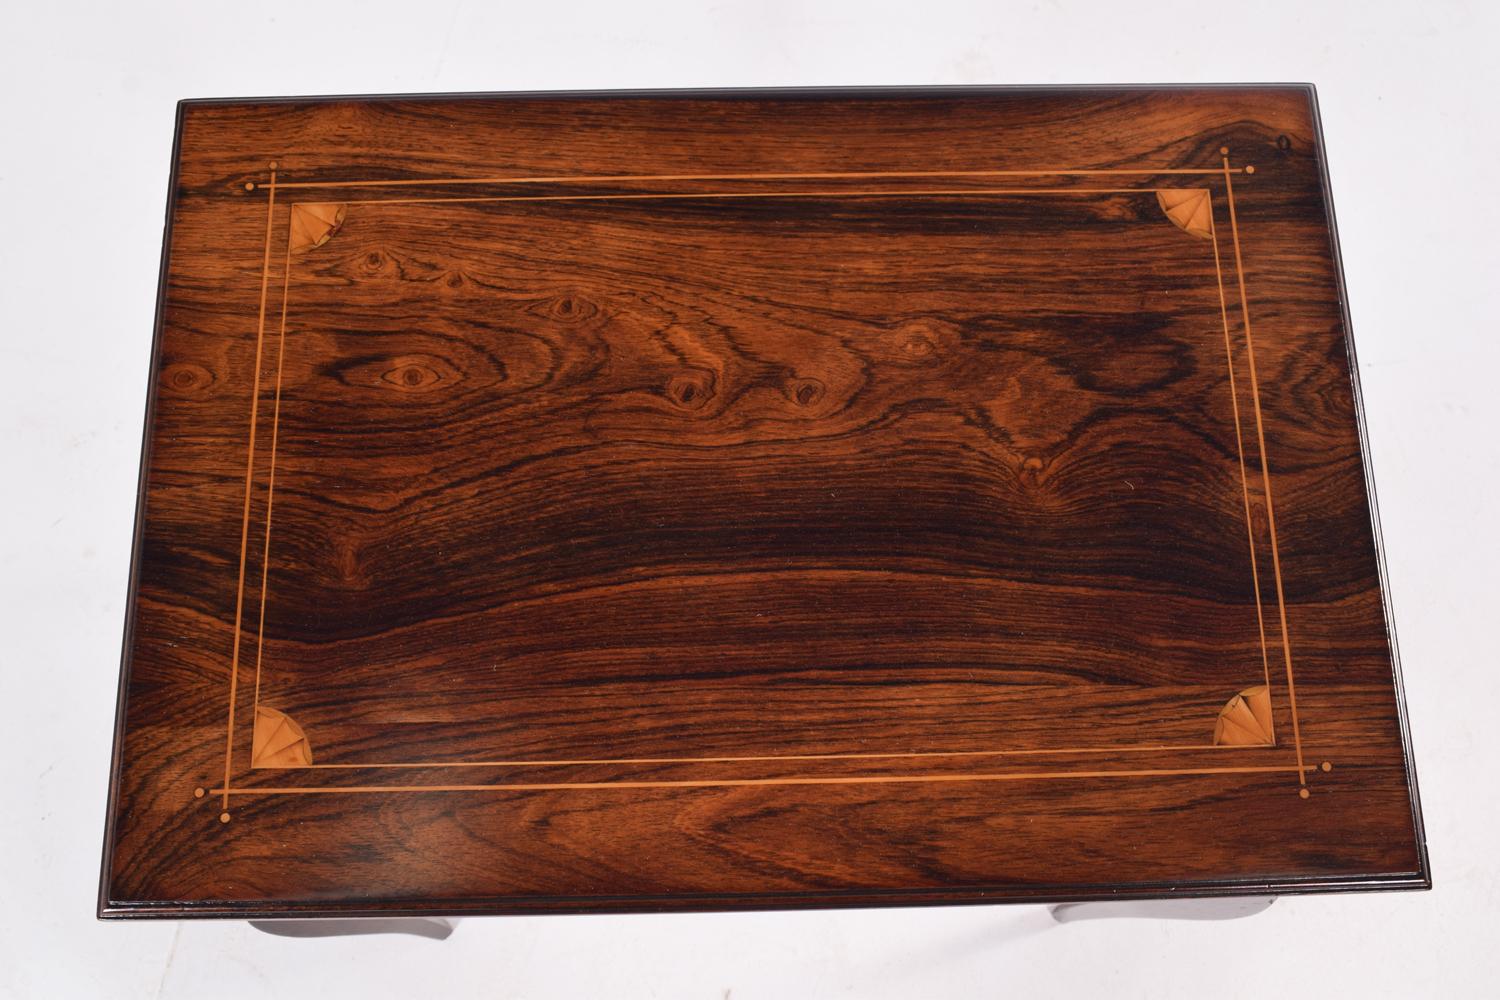 English Edwardian Decorative Inlaid Rosewood Side Table, 1910 In Good Condition For Sale In Lisboa, Lisboa